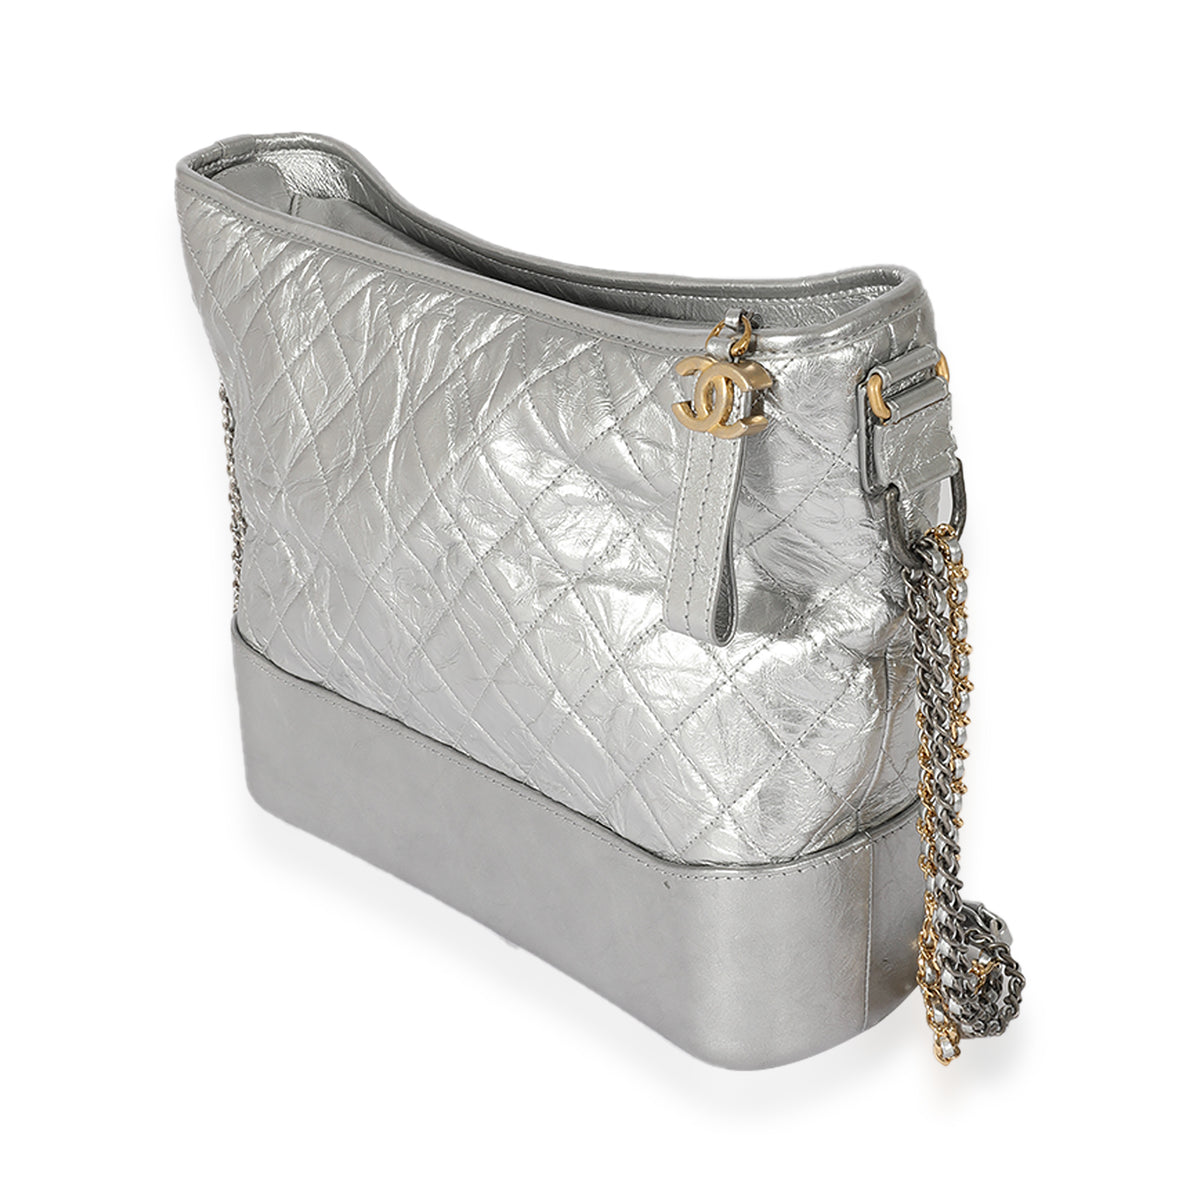 Silver Quilted Aged Calfskin Large Gabrielle Hobo